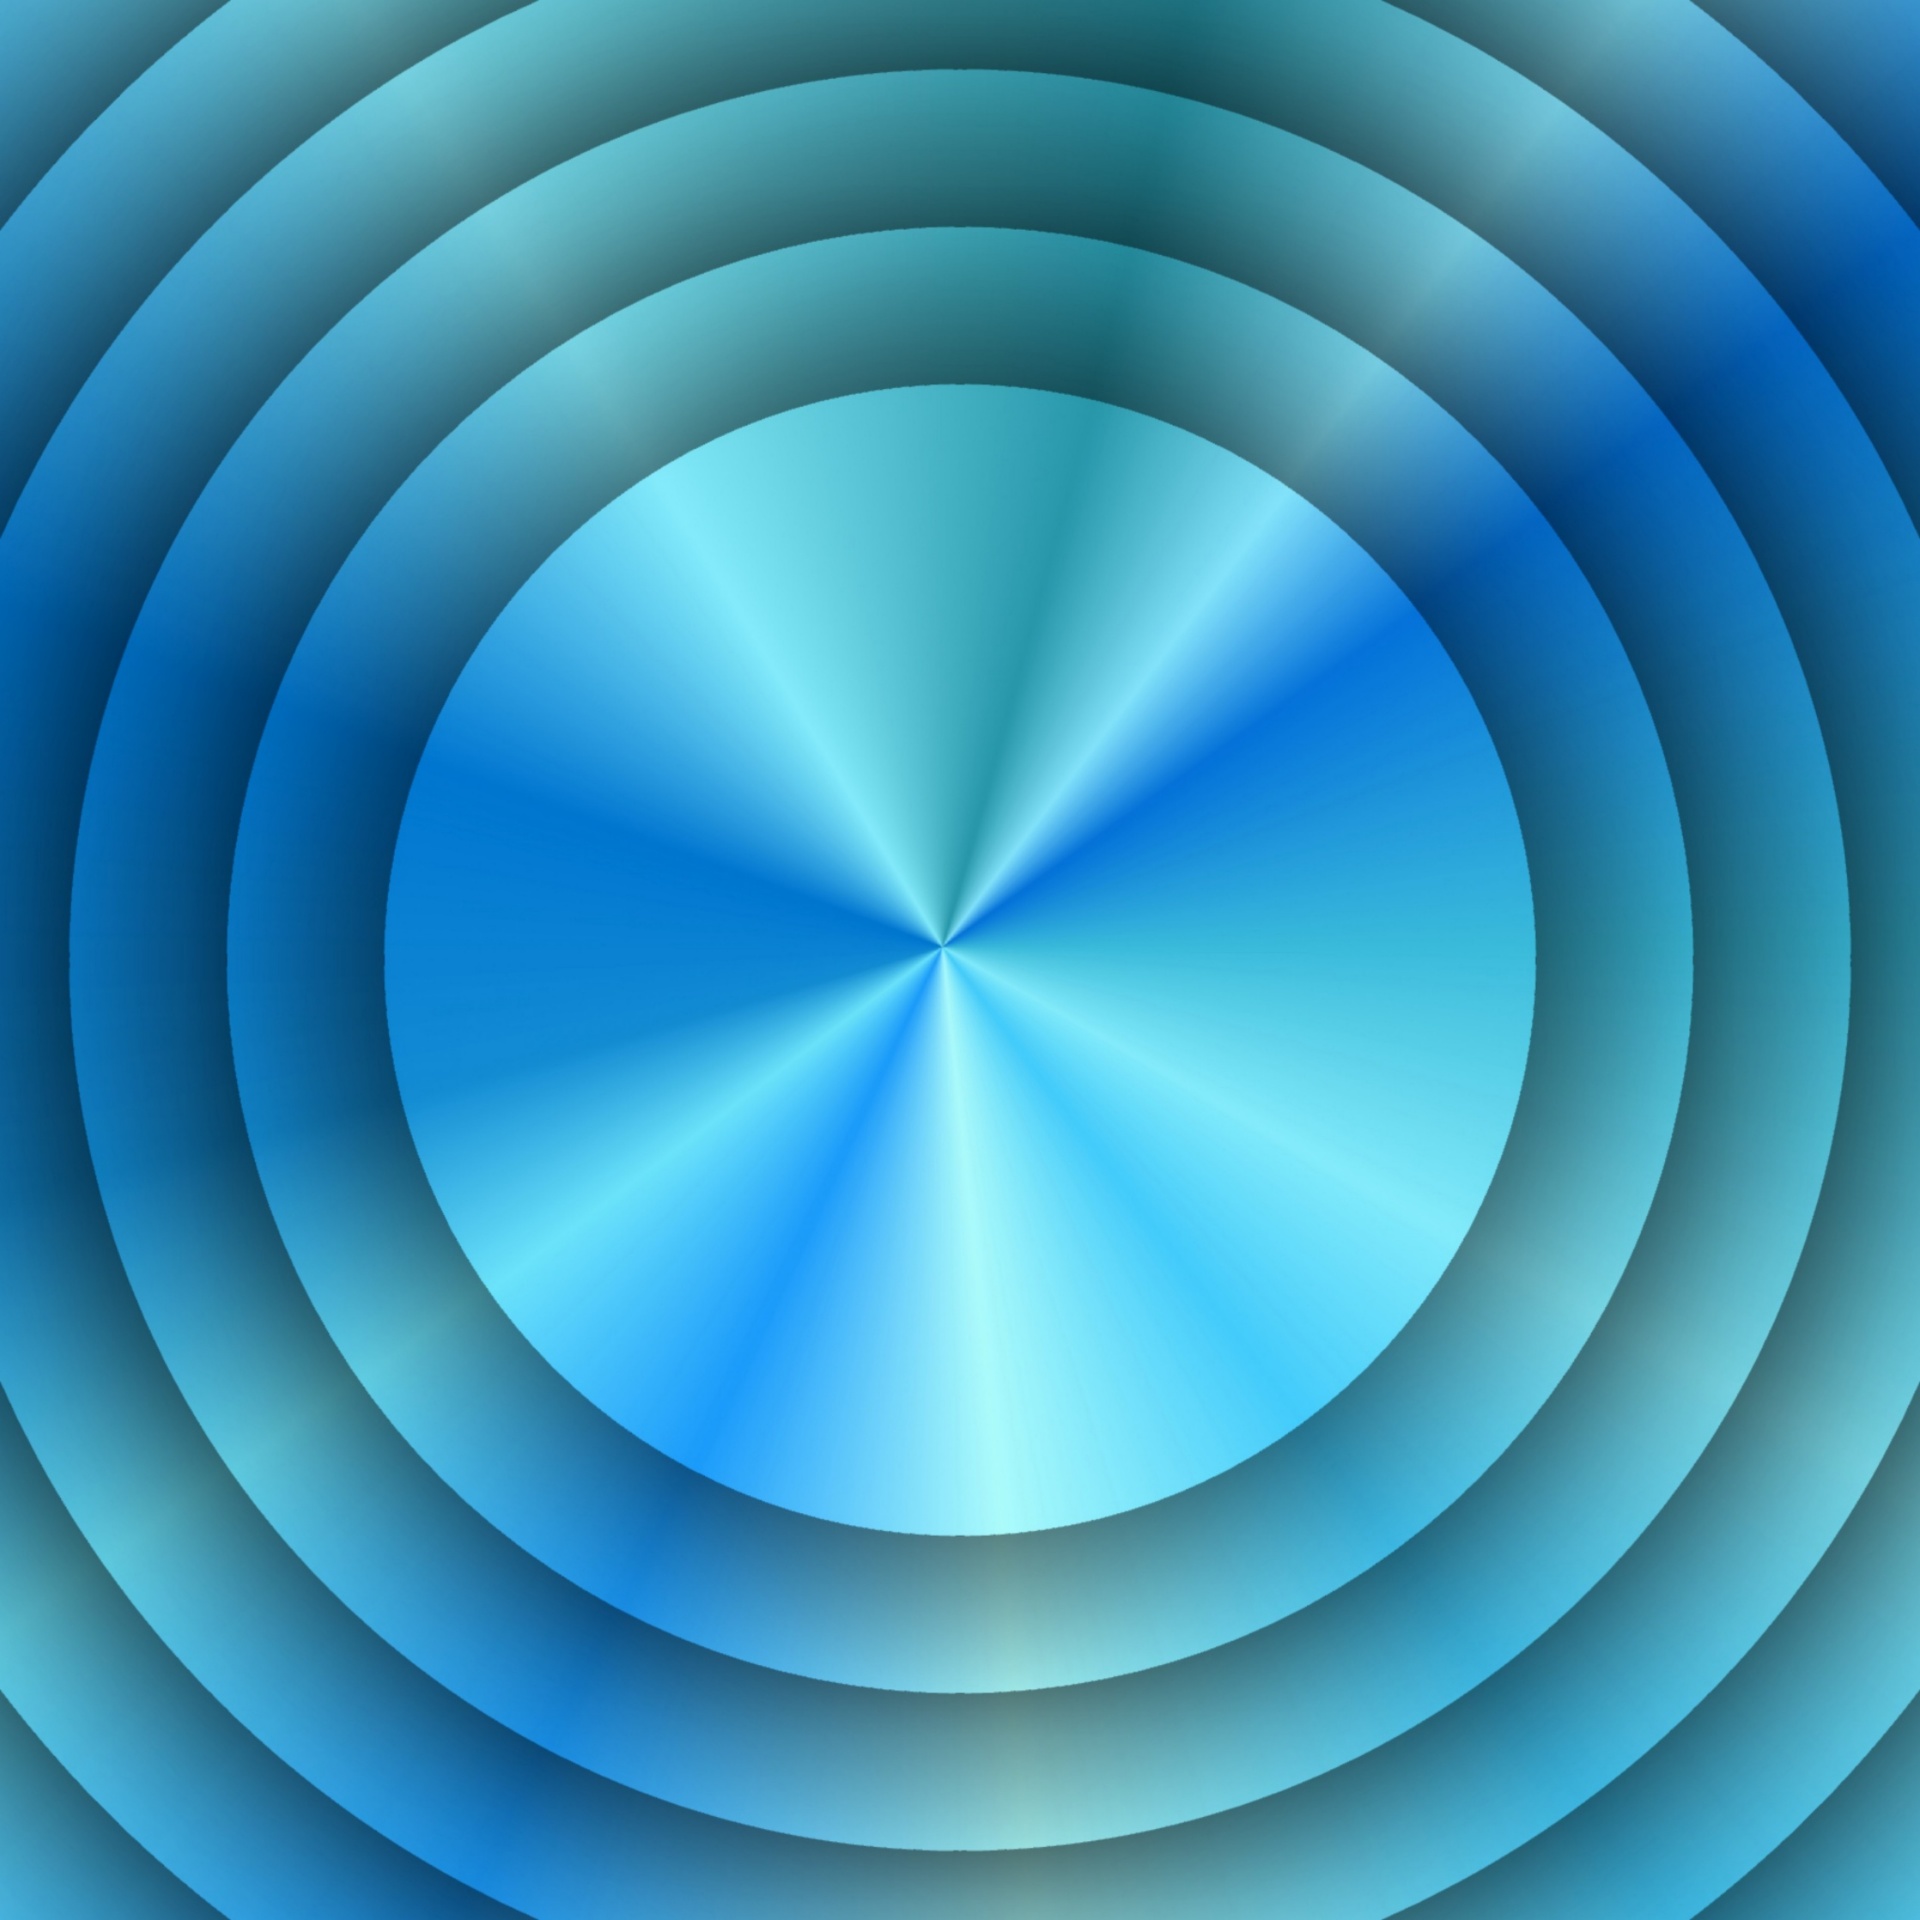 wallpaper blue concentric free photo